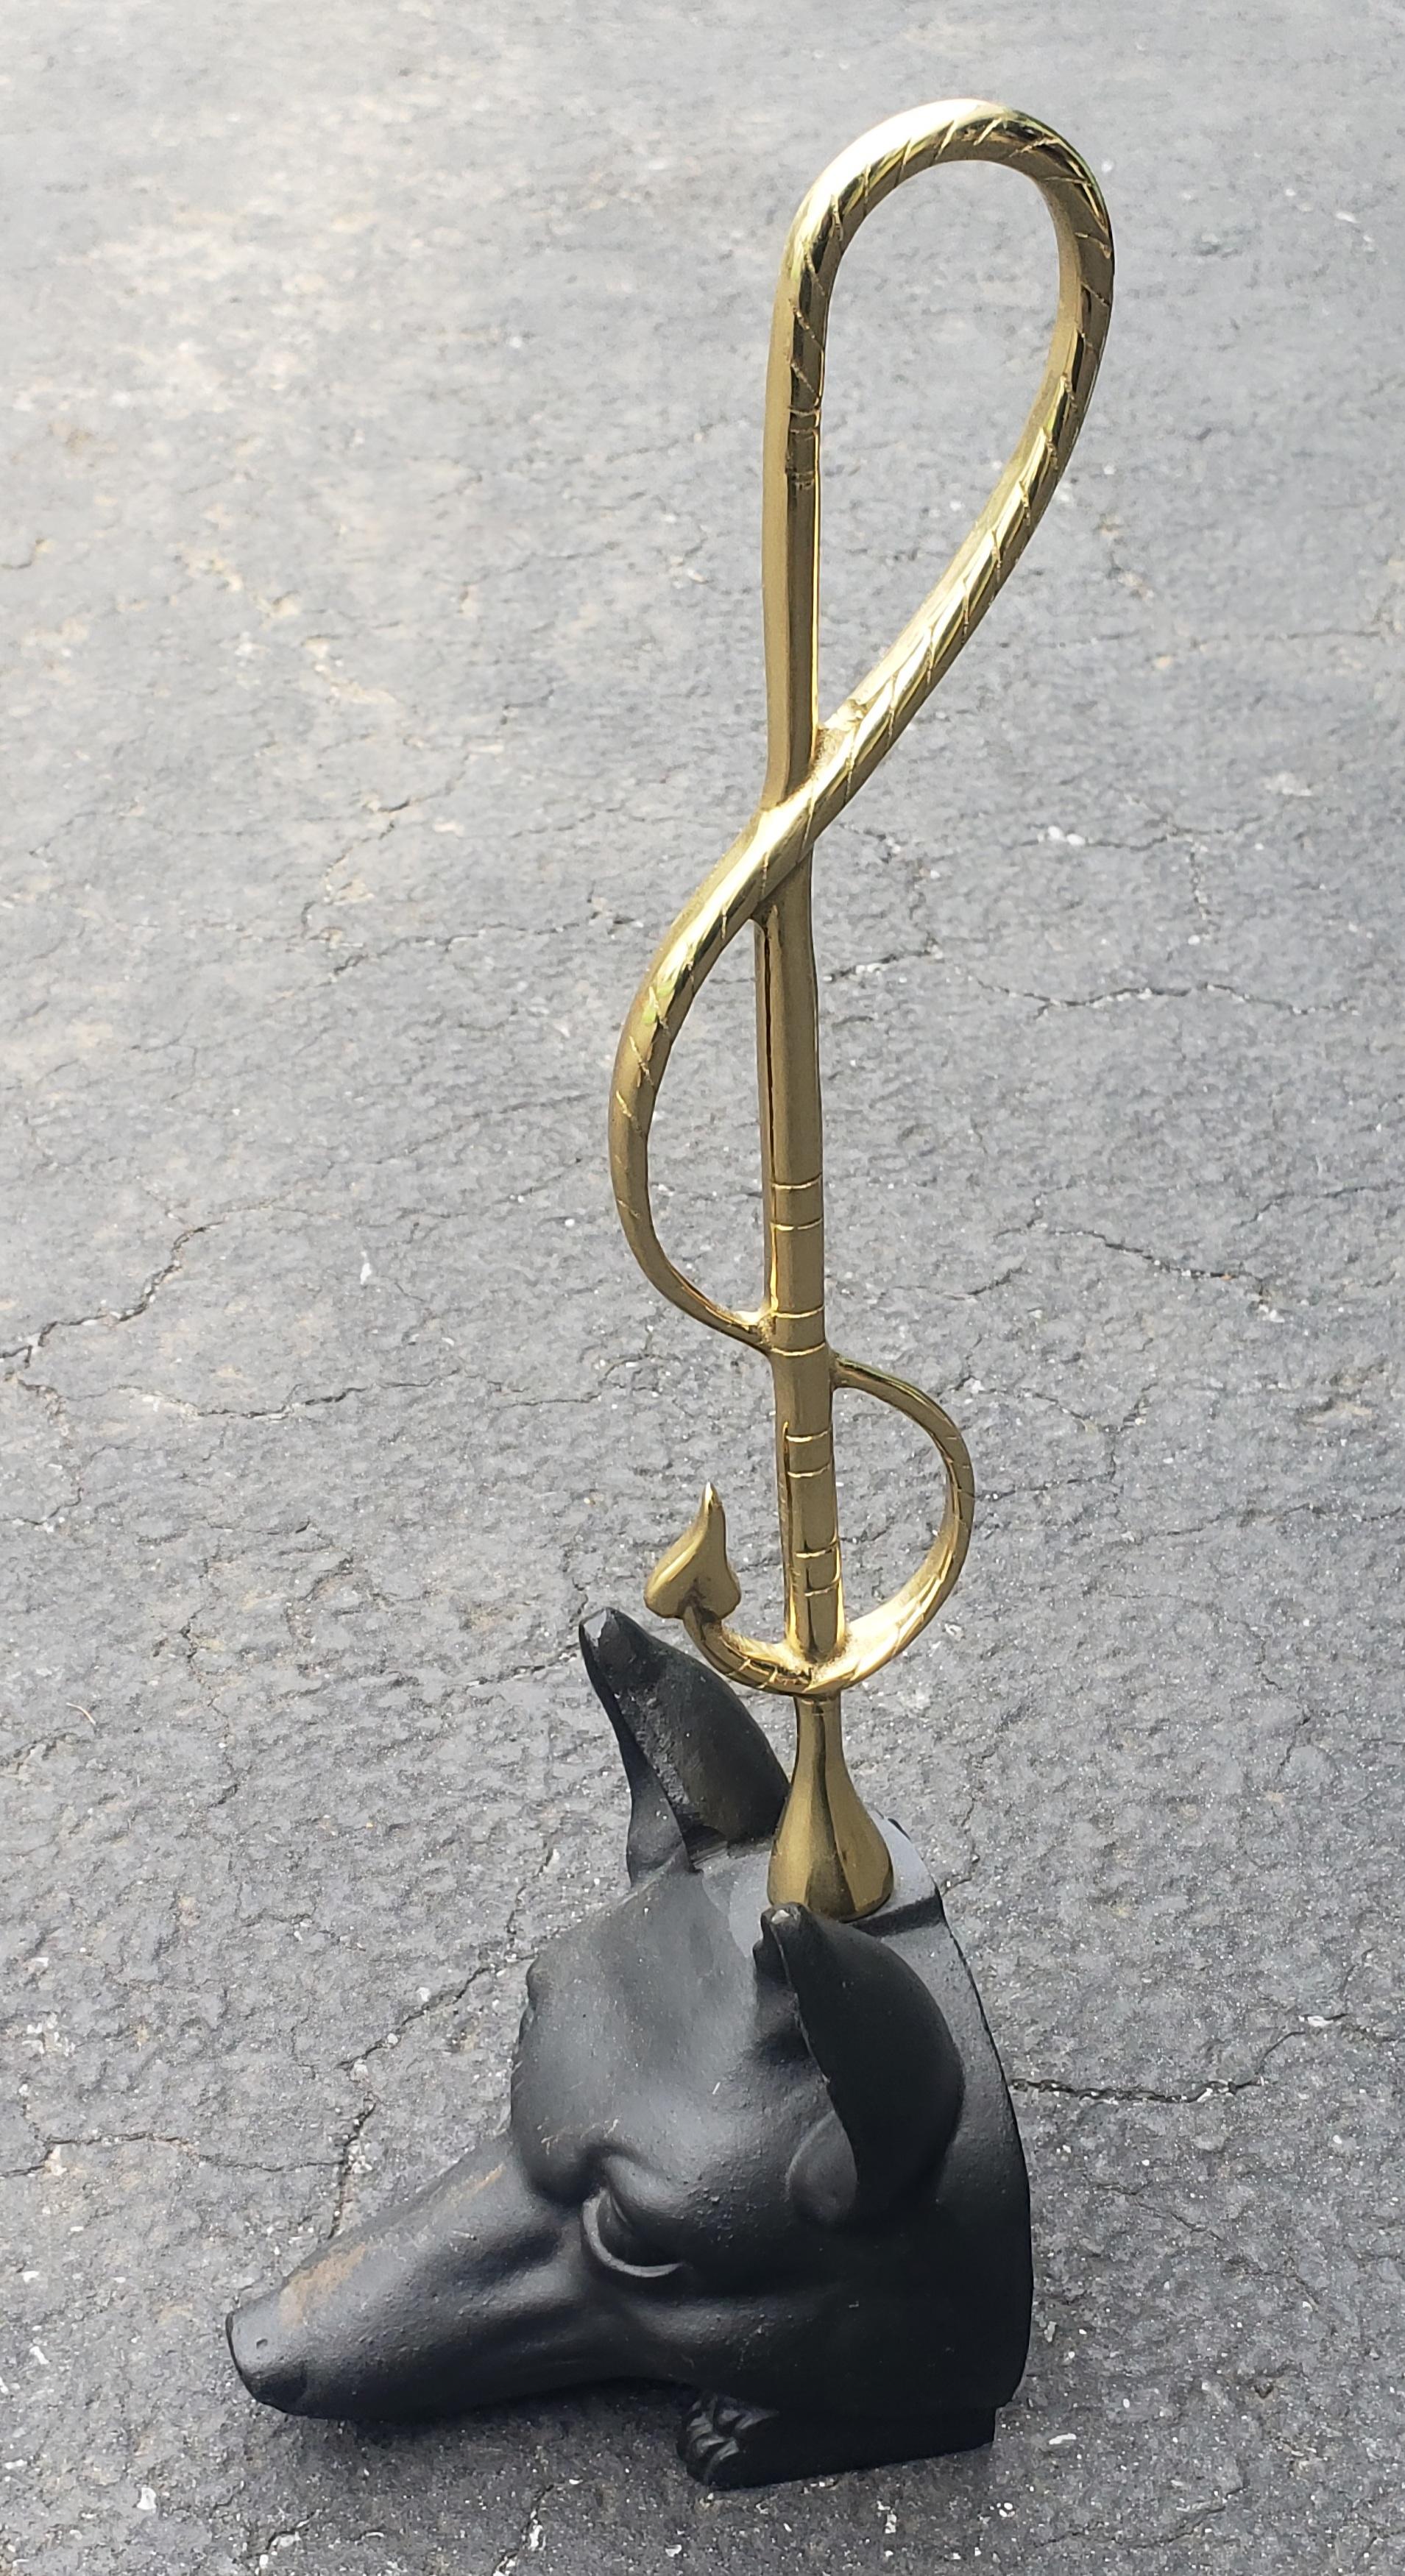 A stylish Edwardian design Brass and Iron Door Stop with Fox Head and Riding Crop in great vintage condition. Measures 4.5